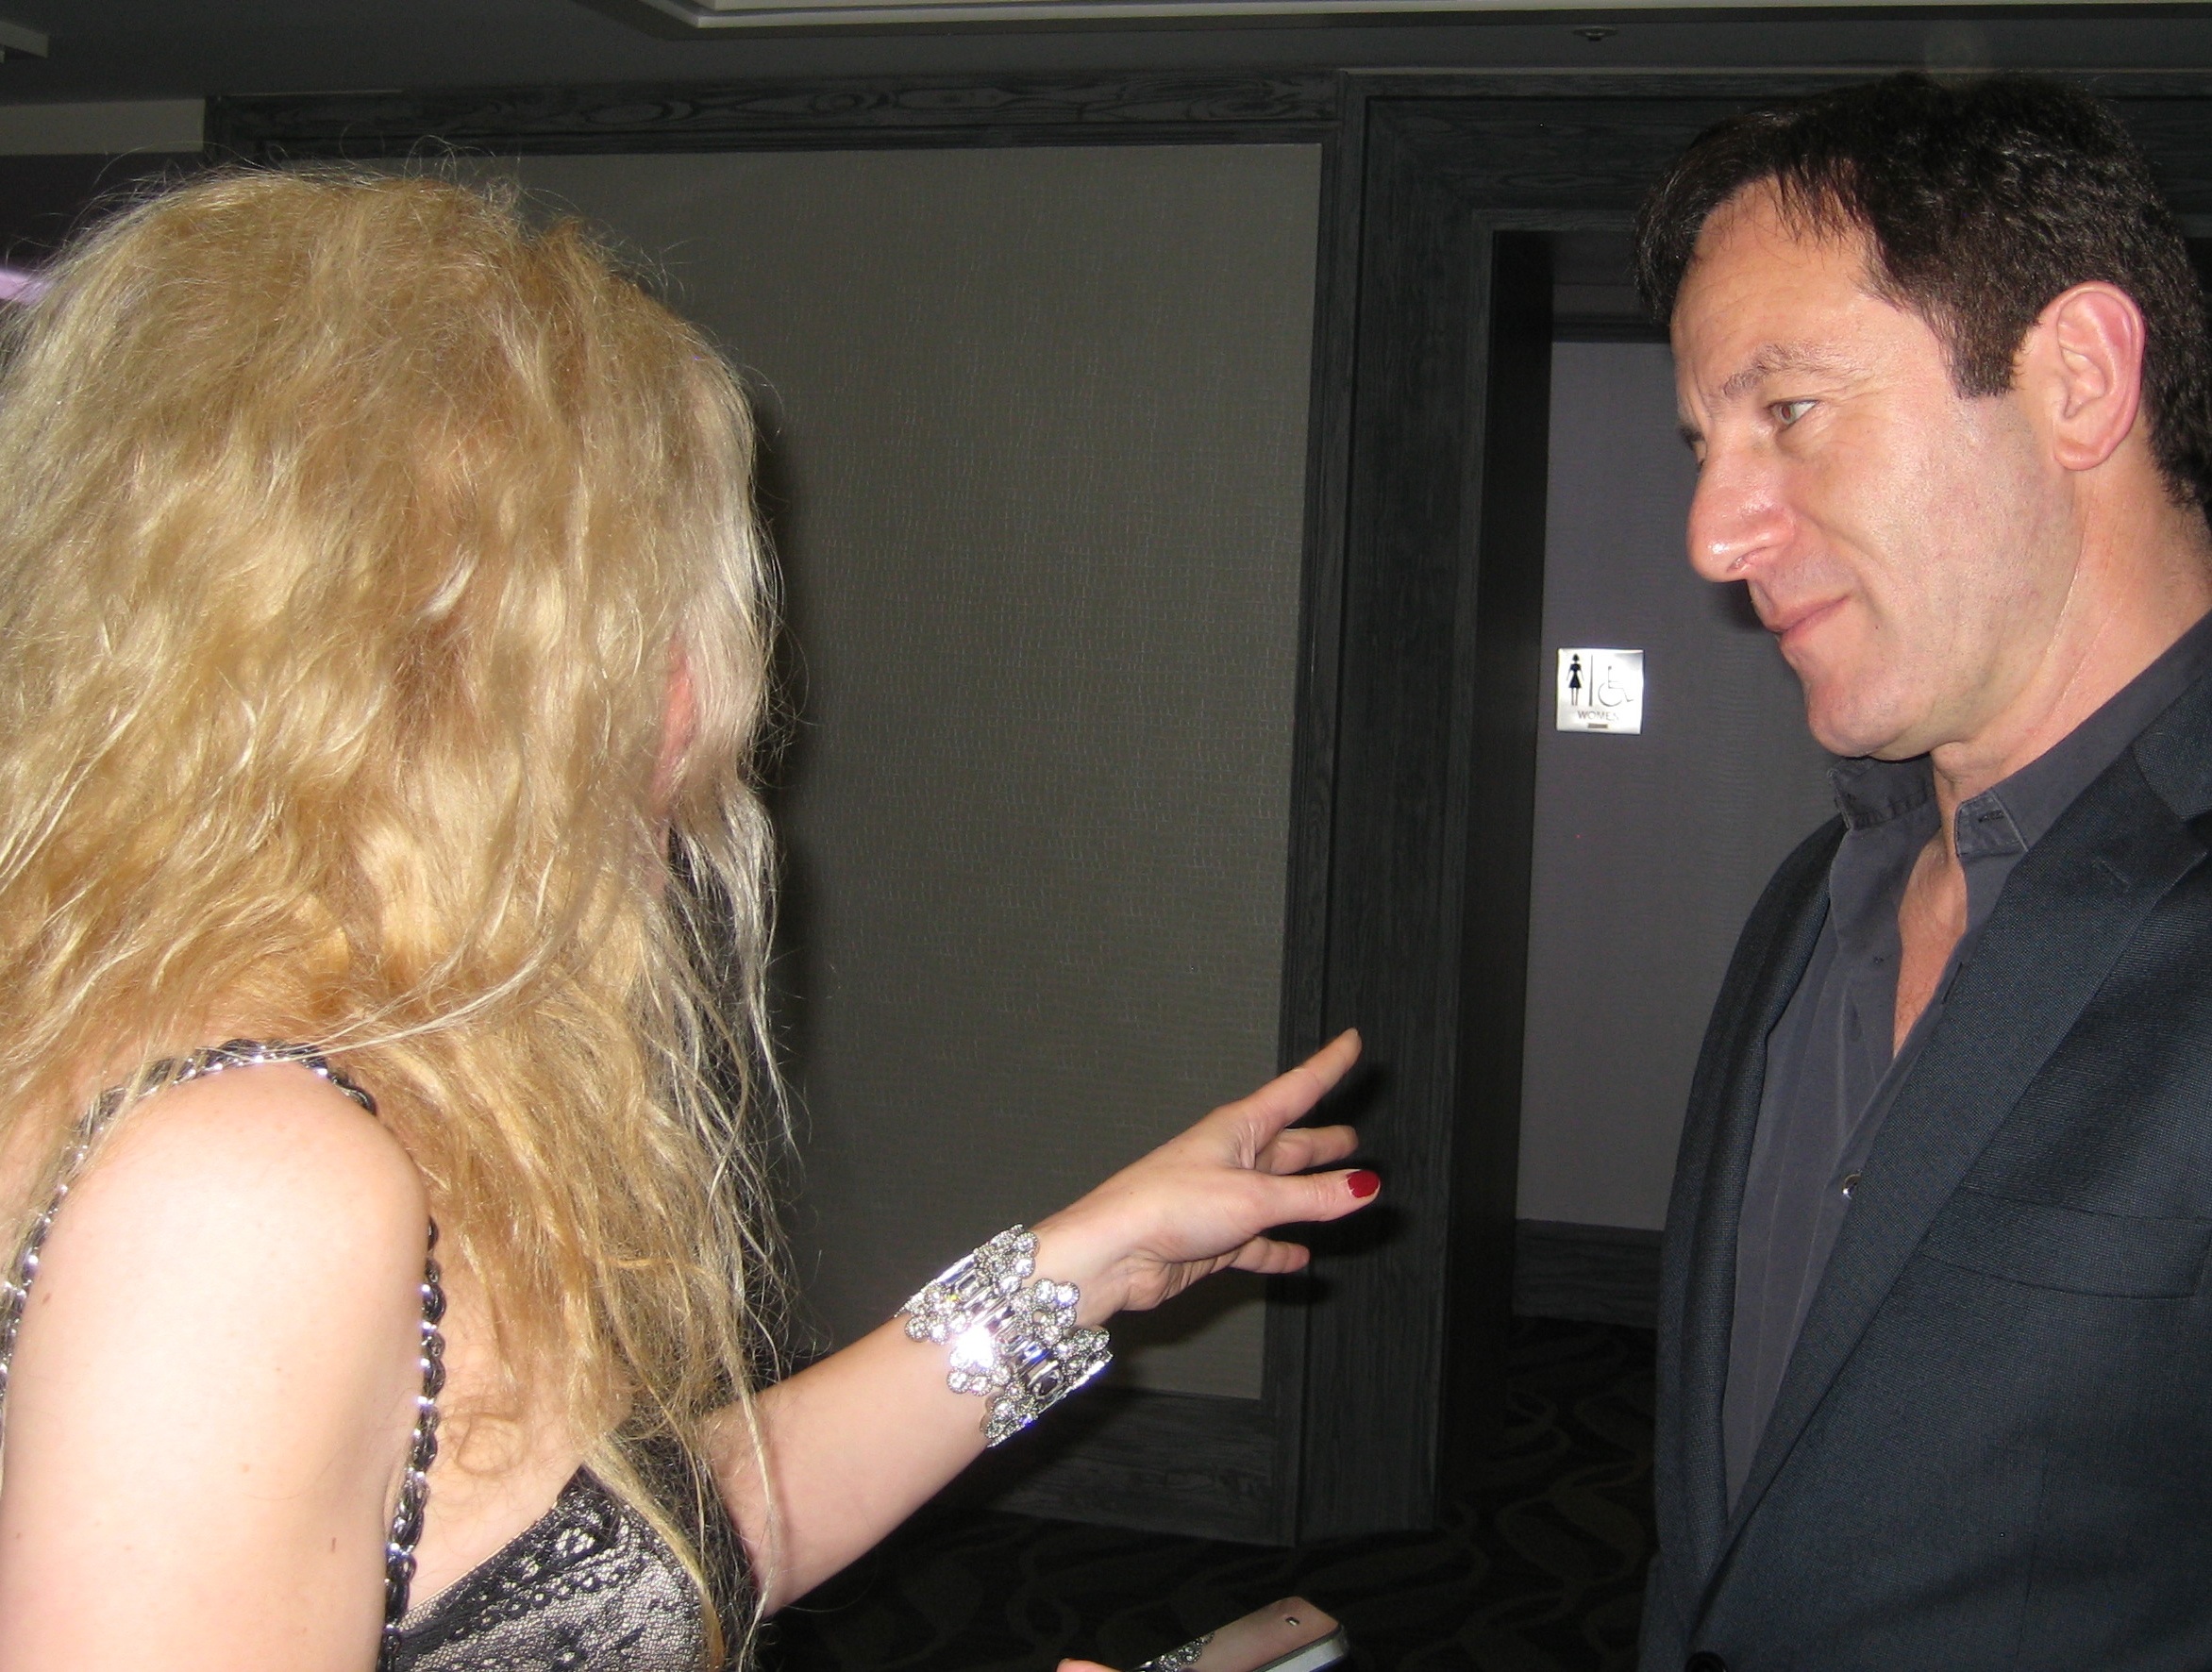 Adrienne Papp of Atlantic Publicity interviewing Jason Isaacs at the 2012 International Press Academy Satellite Awards, December 16, 2012